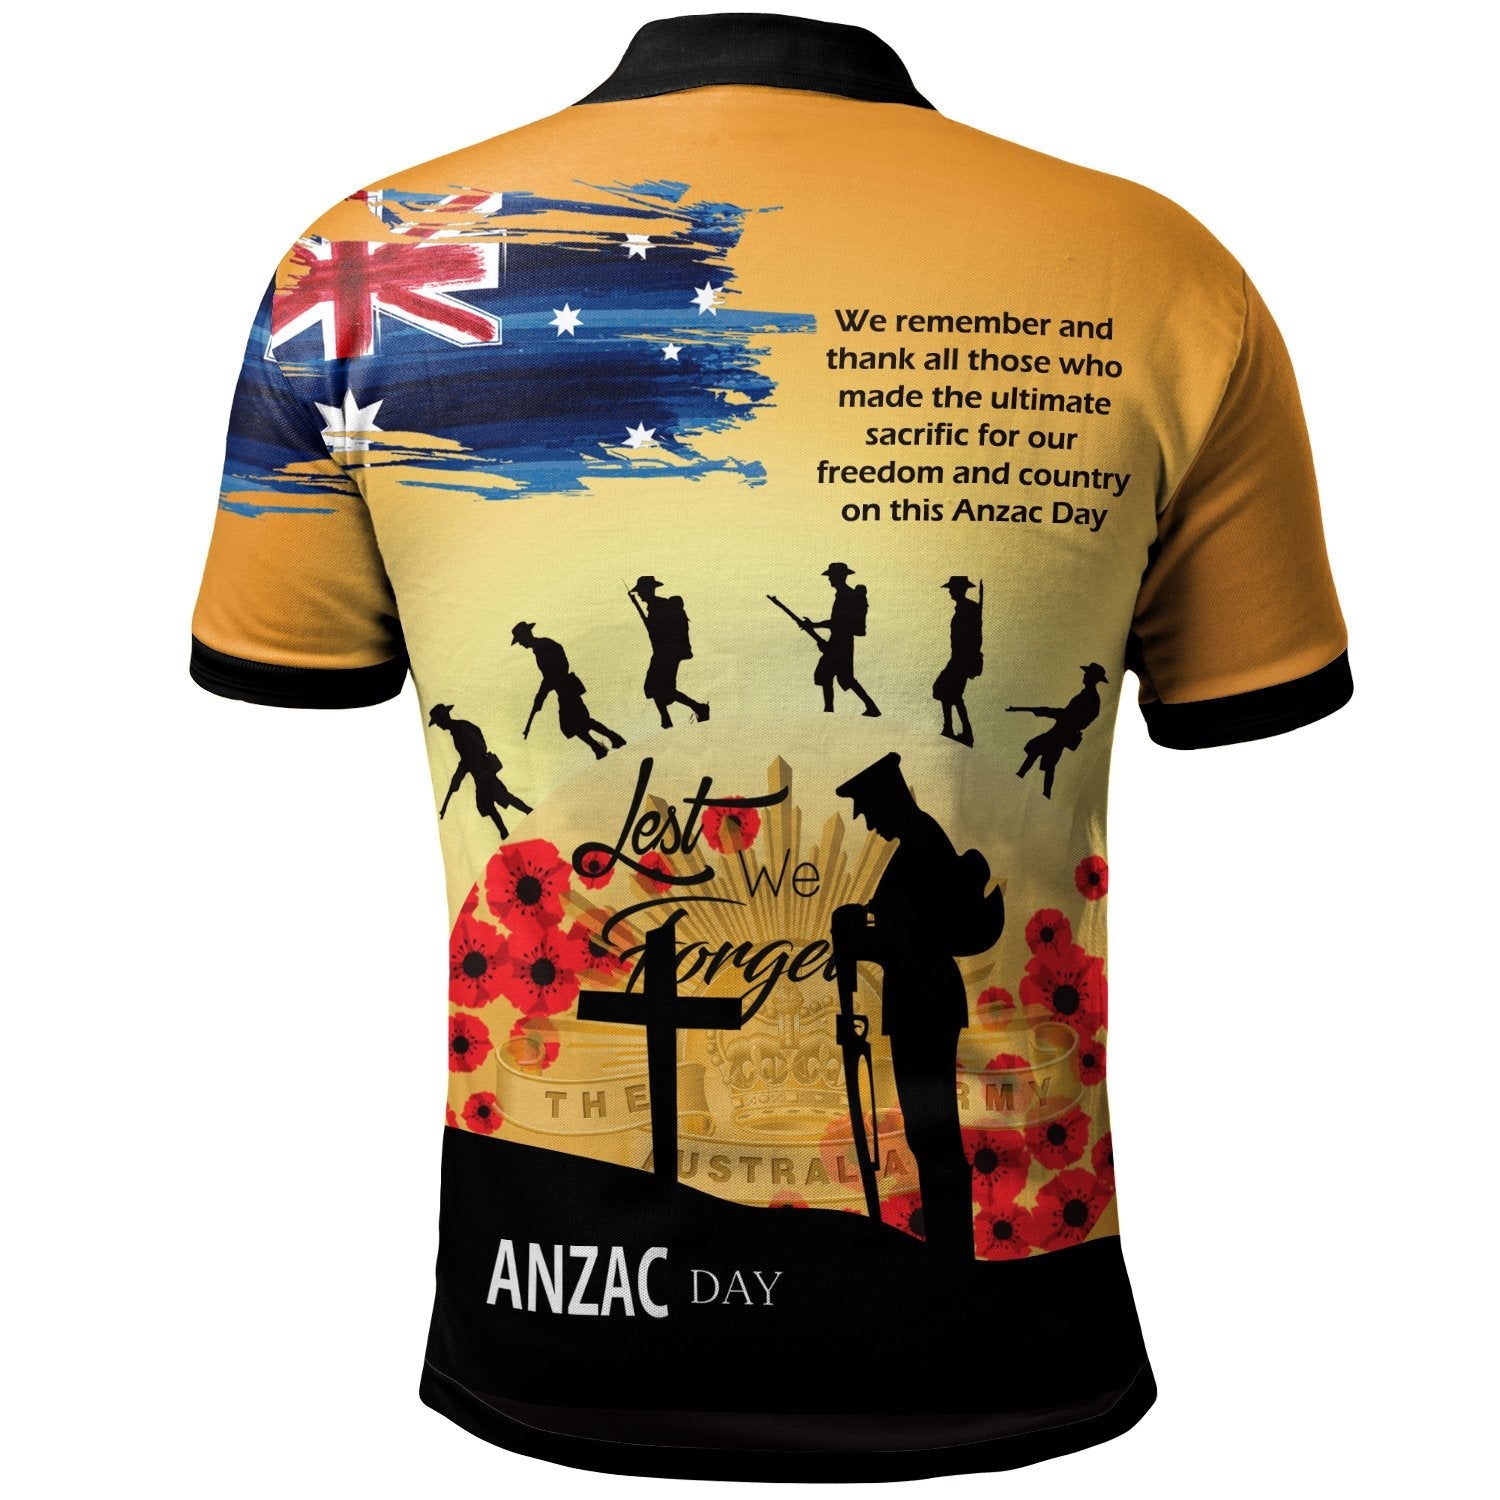 anzac-day-polo-shirt-lest-we-forget